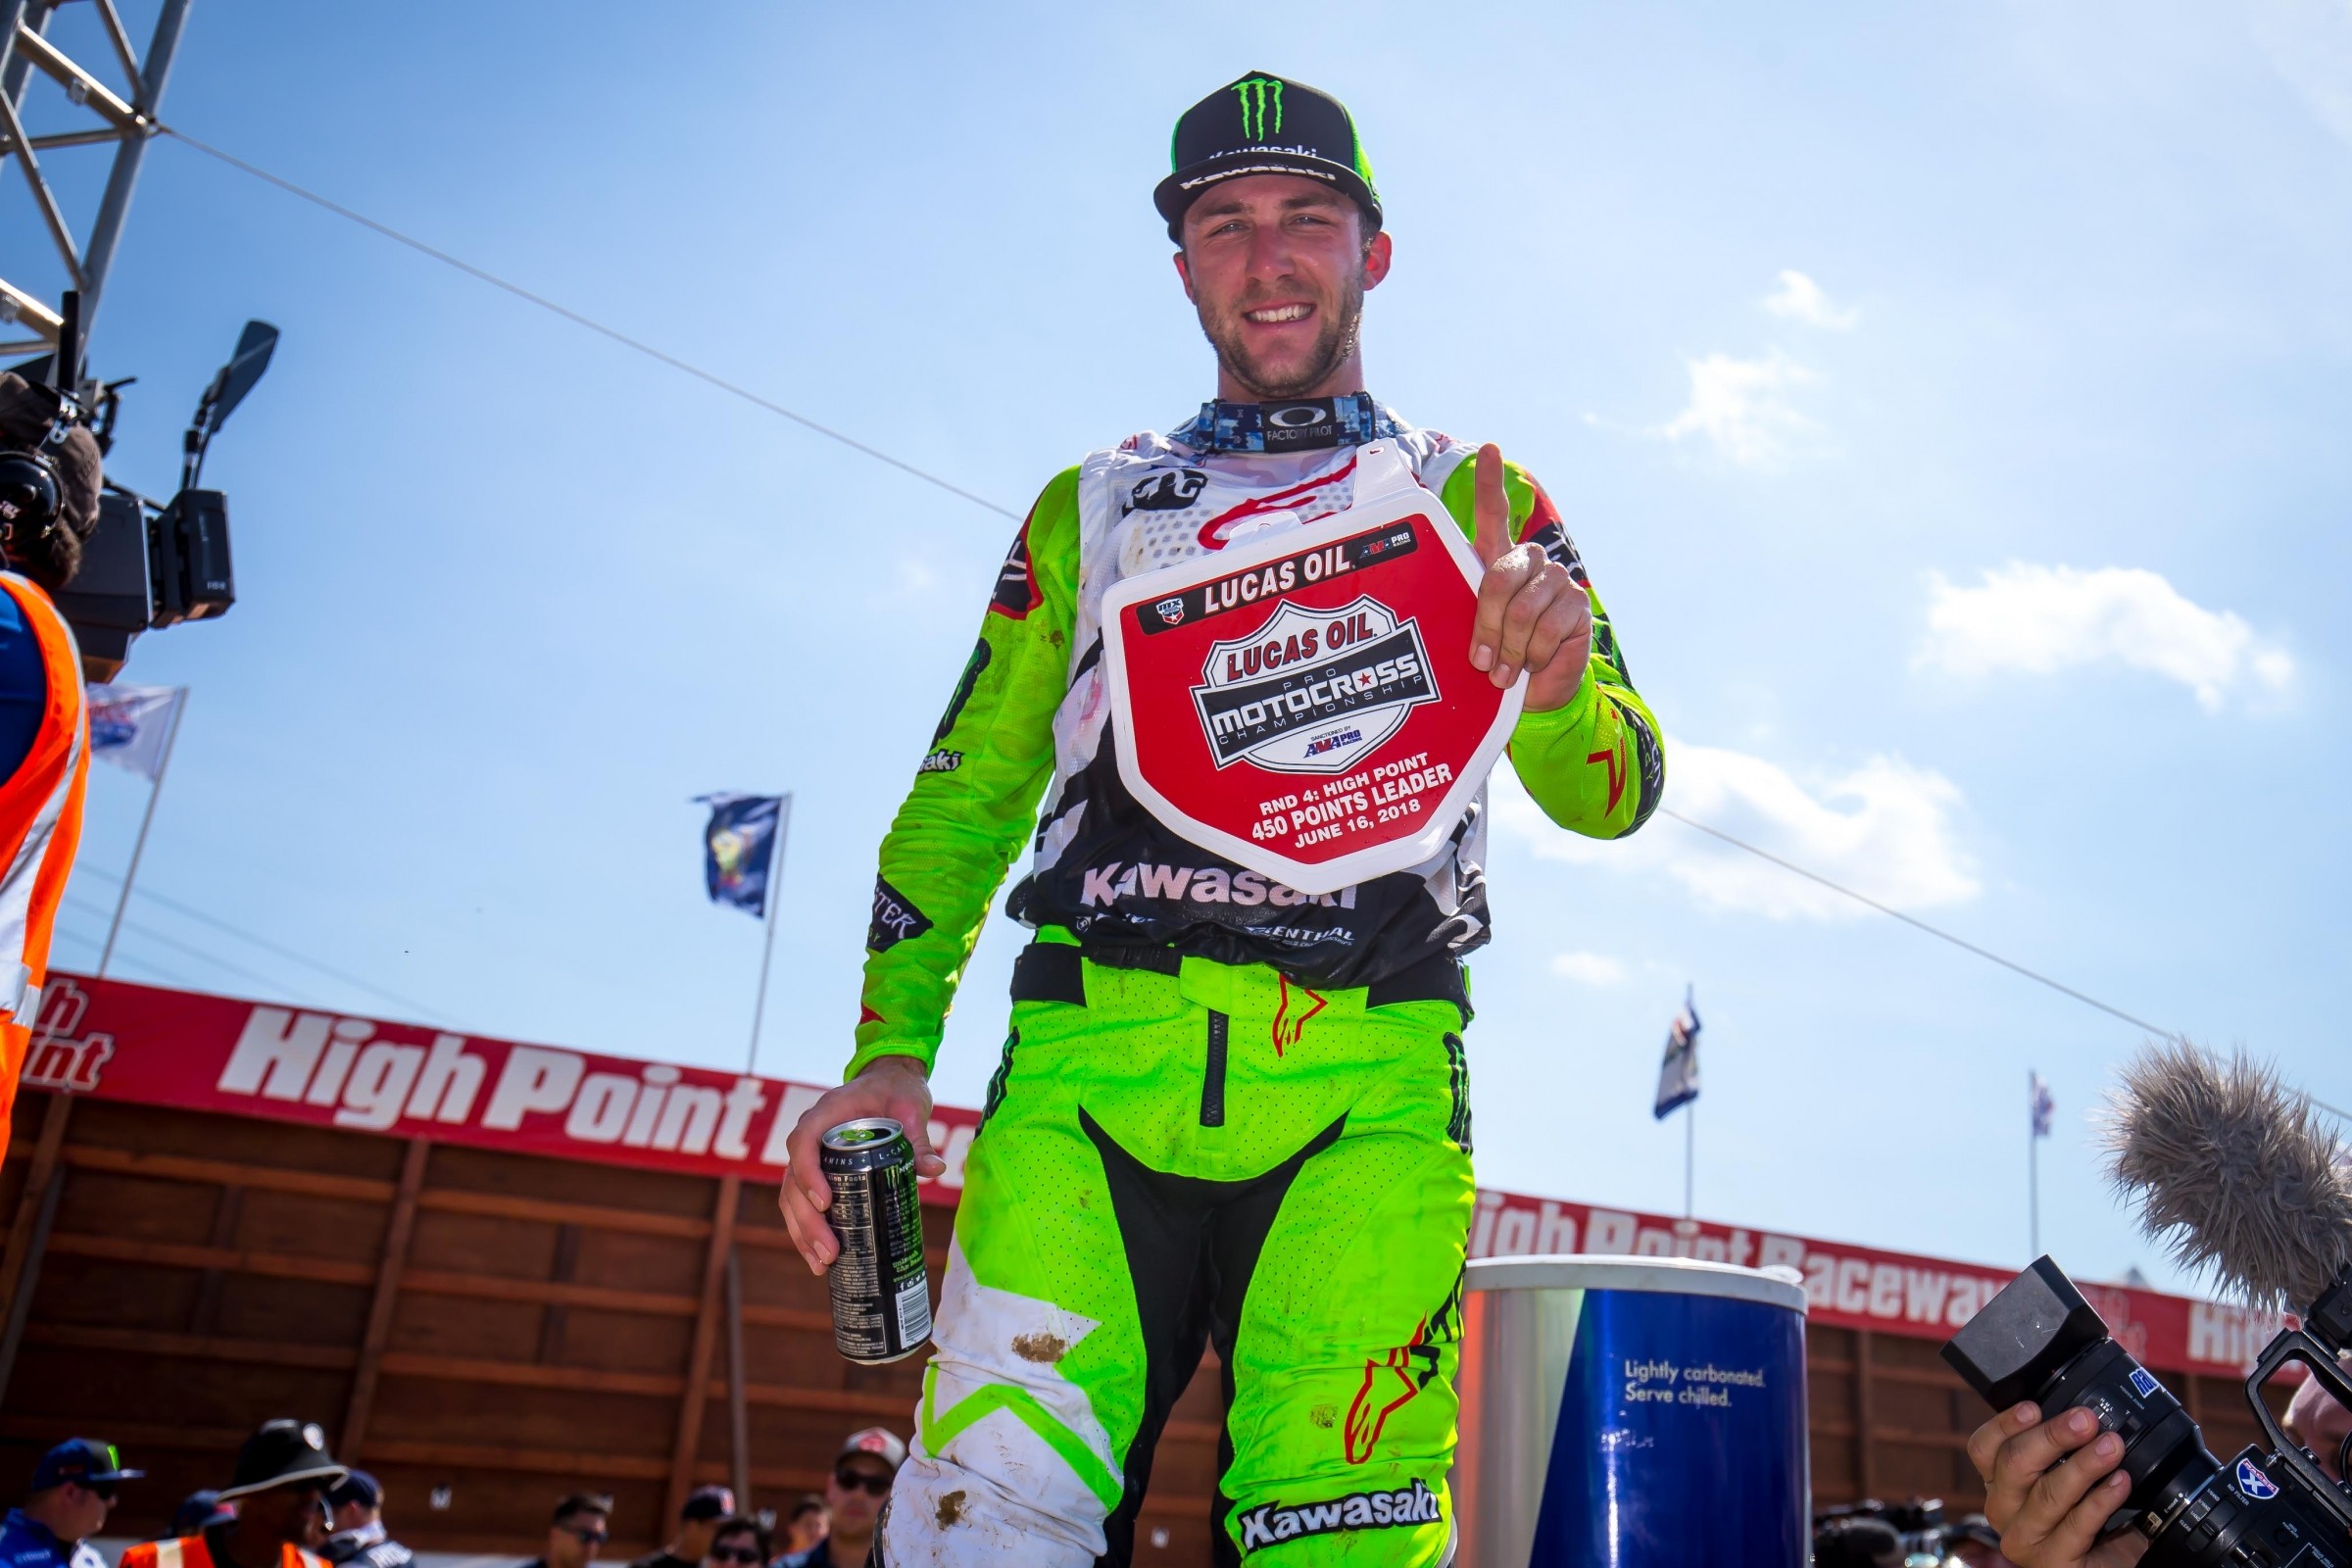 2018 High Point Press Conference: Eli Tomac, Marvin Musquin, Justin ...